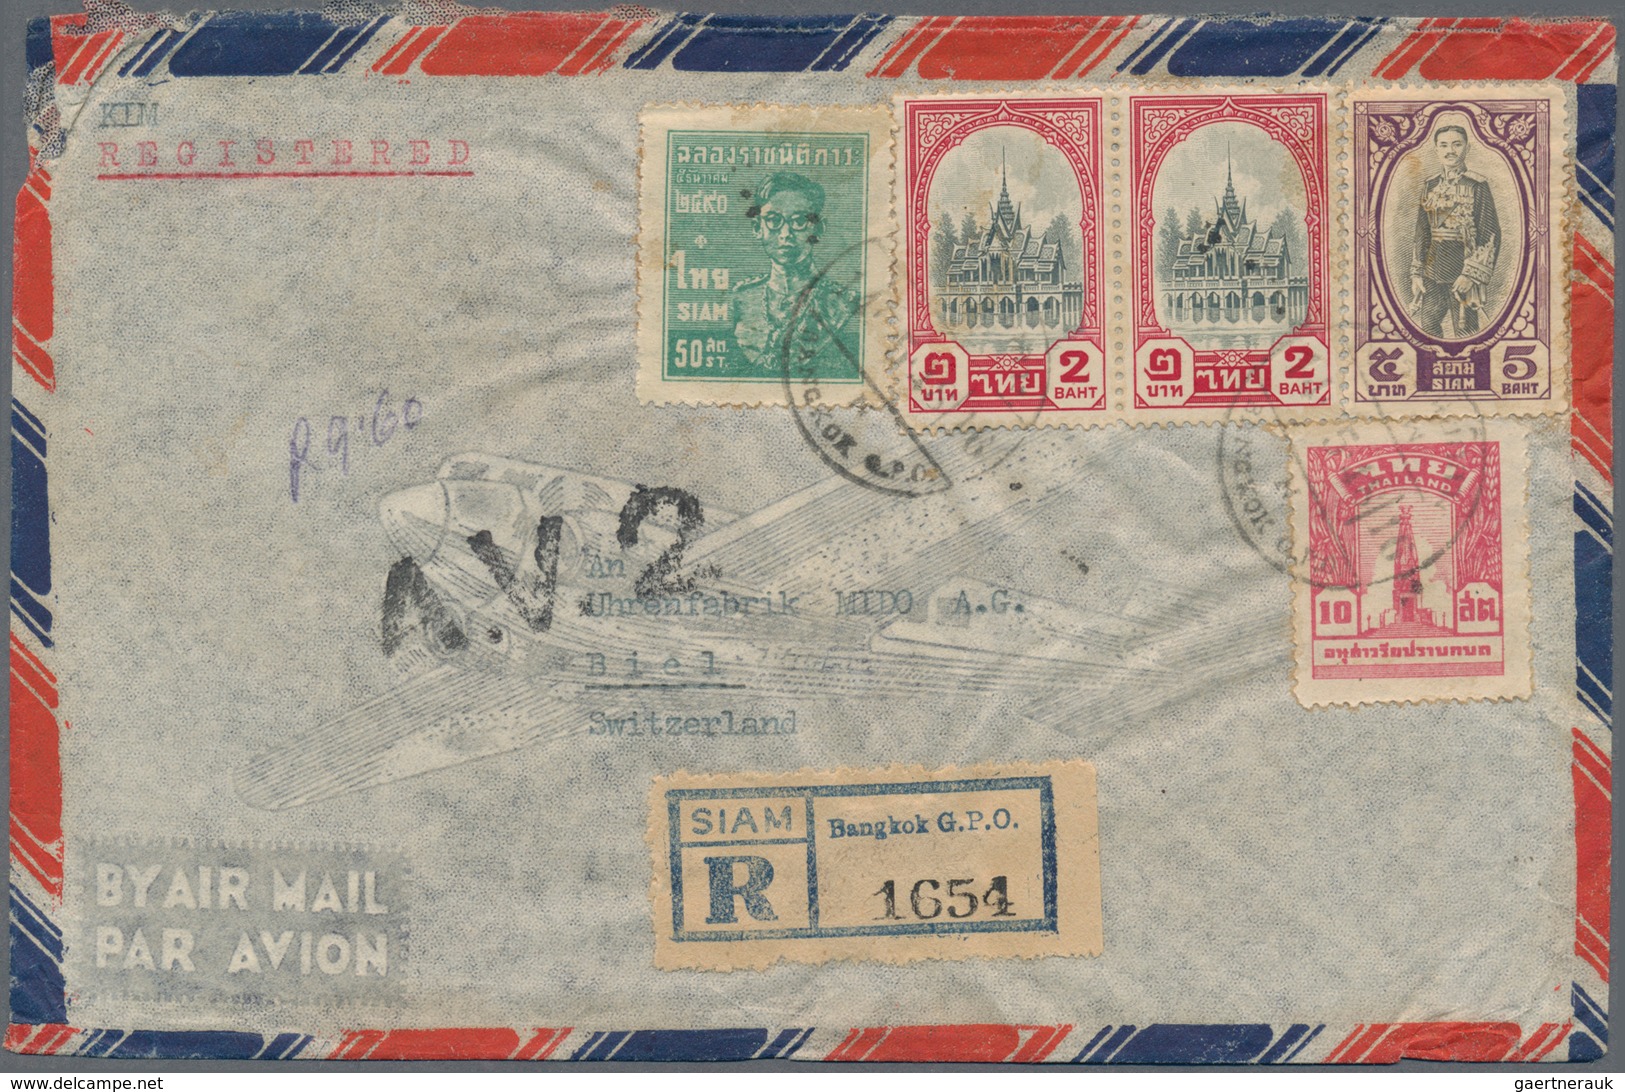 Thailand: 1948 Registered Airmail Cover With "A.V.2" Sent From Bangkok To Biel, Switzerland Franked - Thailand